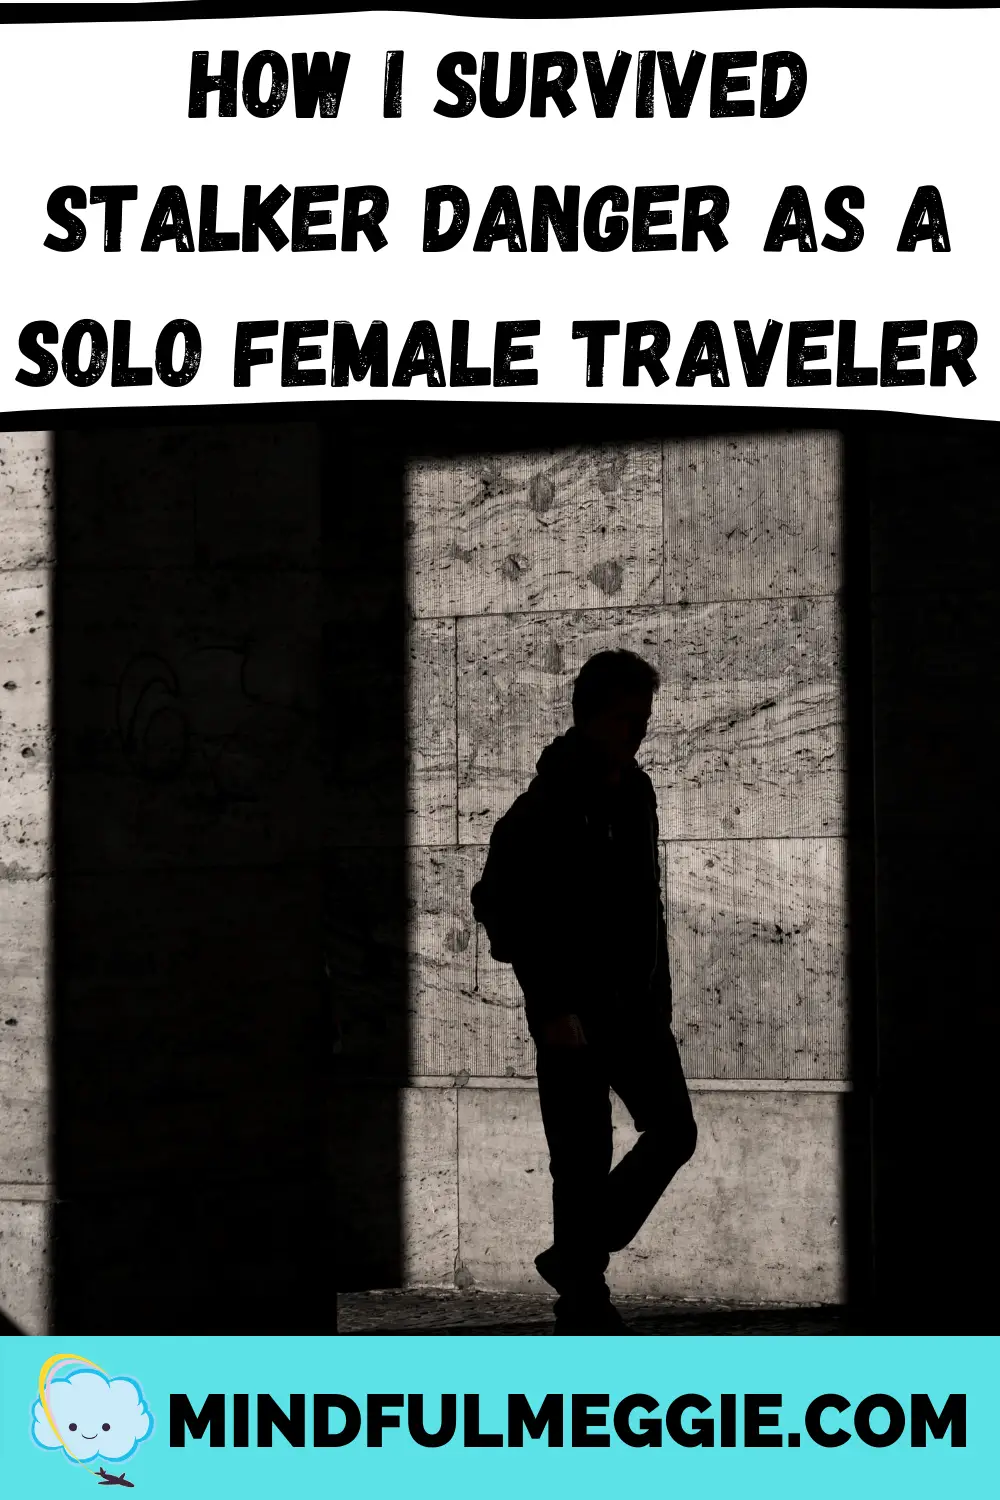 A man dangerously stalked me in my Floridian hotel on my first solo female trip. Learn how I survived, unharmed. #travelblog #travelstory #travelstories #travelblogger #solofemaletravel #solofemaletraveler #solofemaletraveller #strangerdanger #stalker #stalkeralert